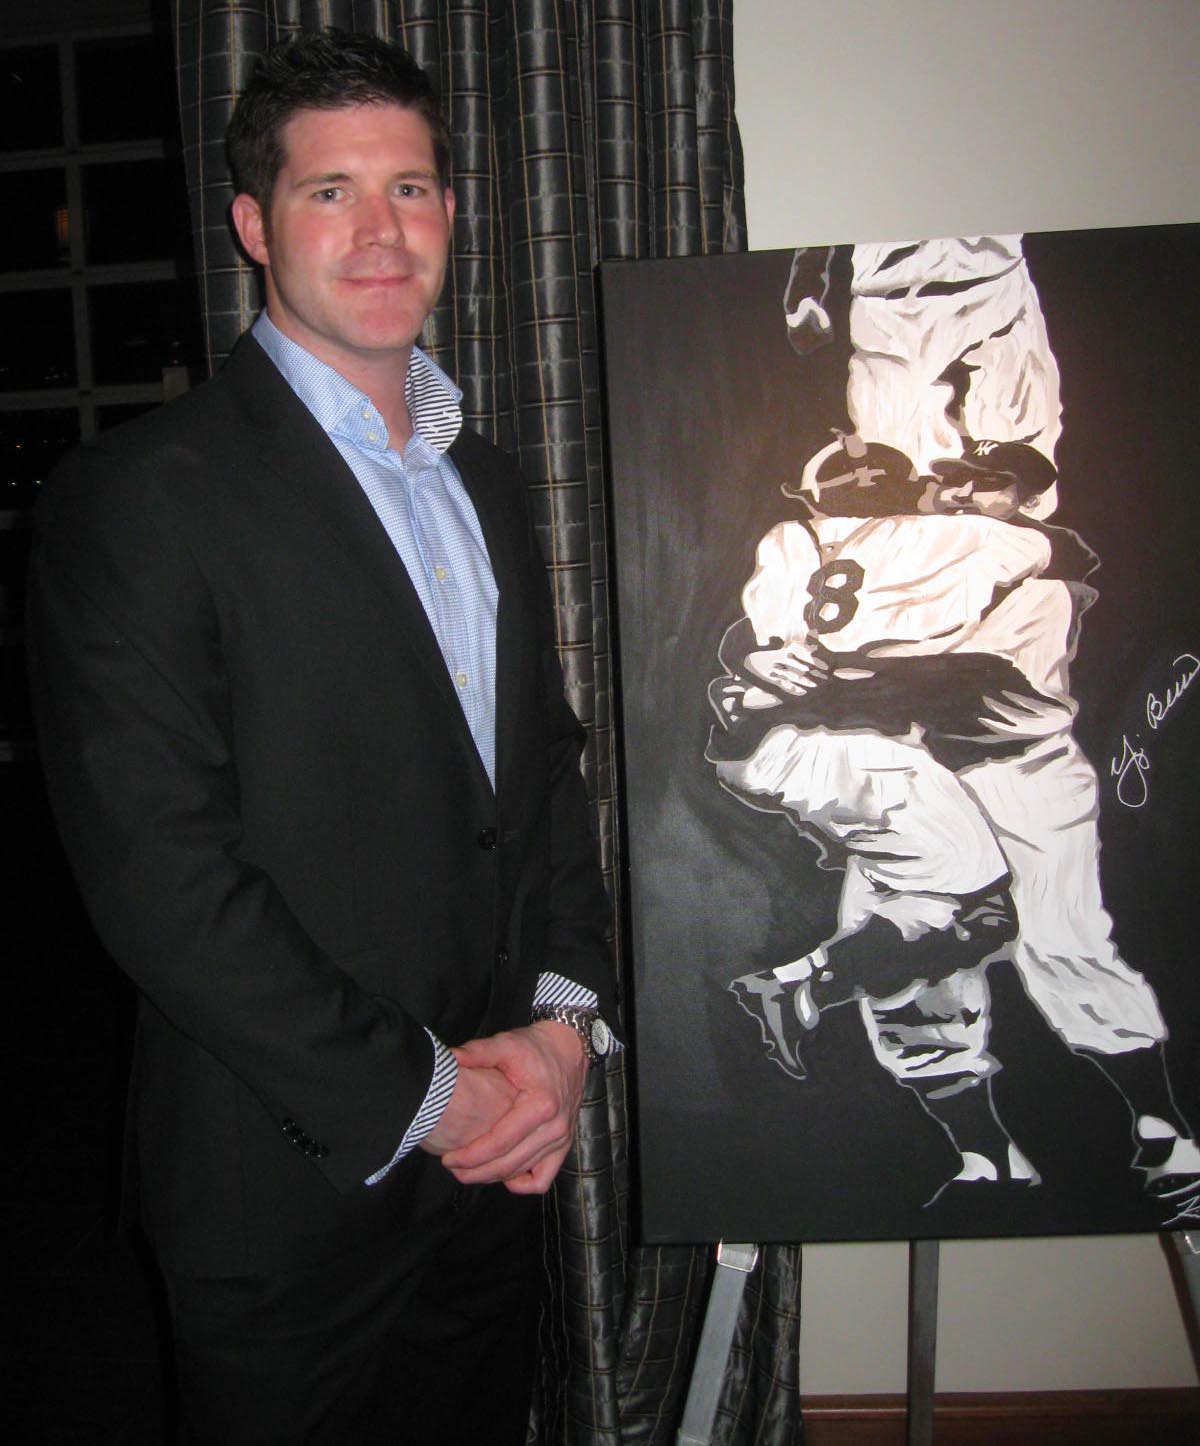 Professional baseball player turned artist Kevin Rival poses with one his prize paintings